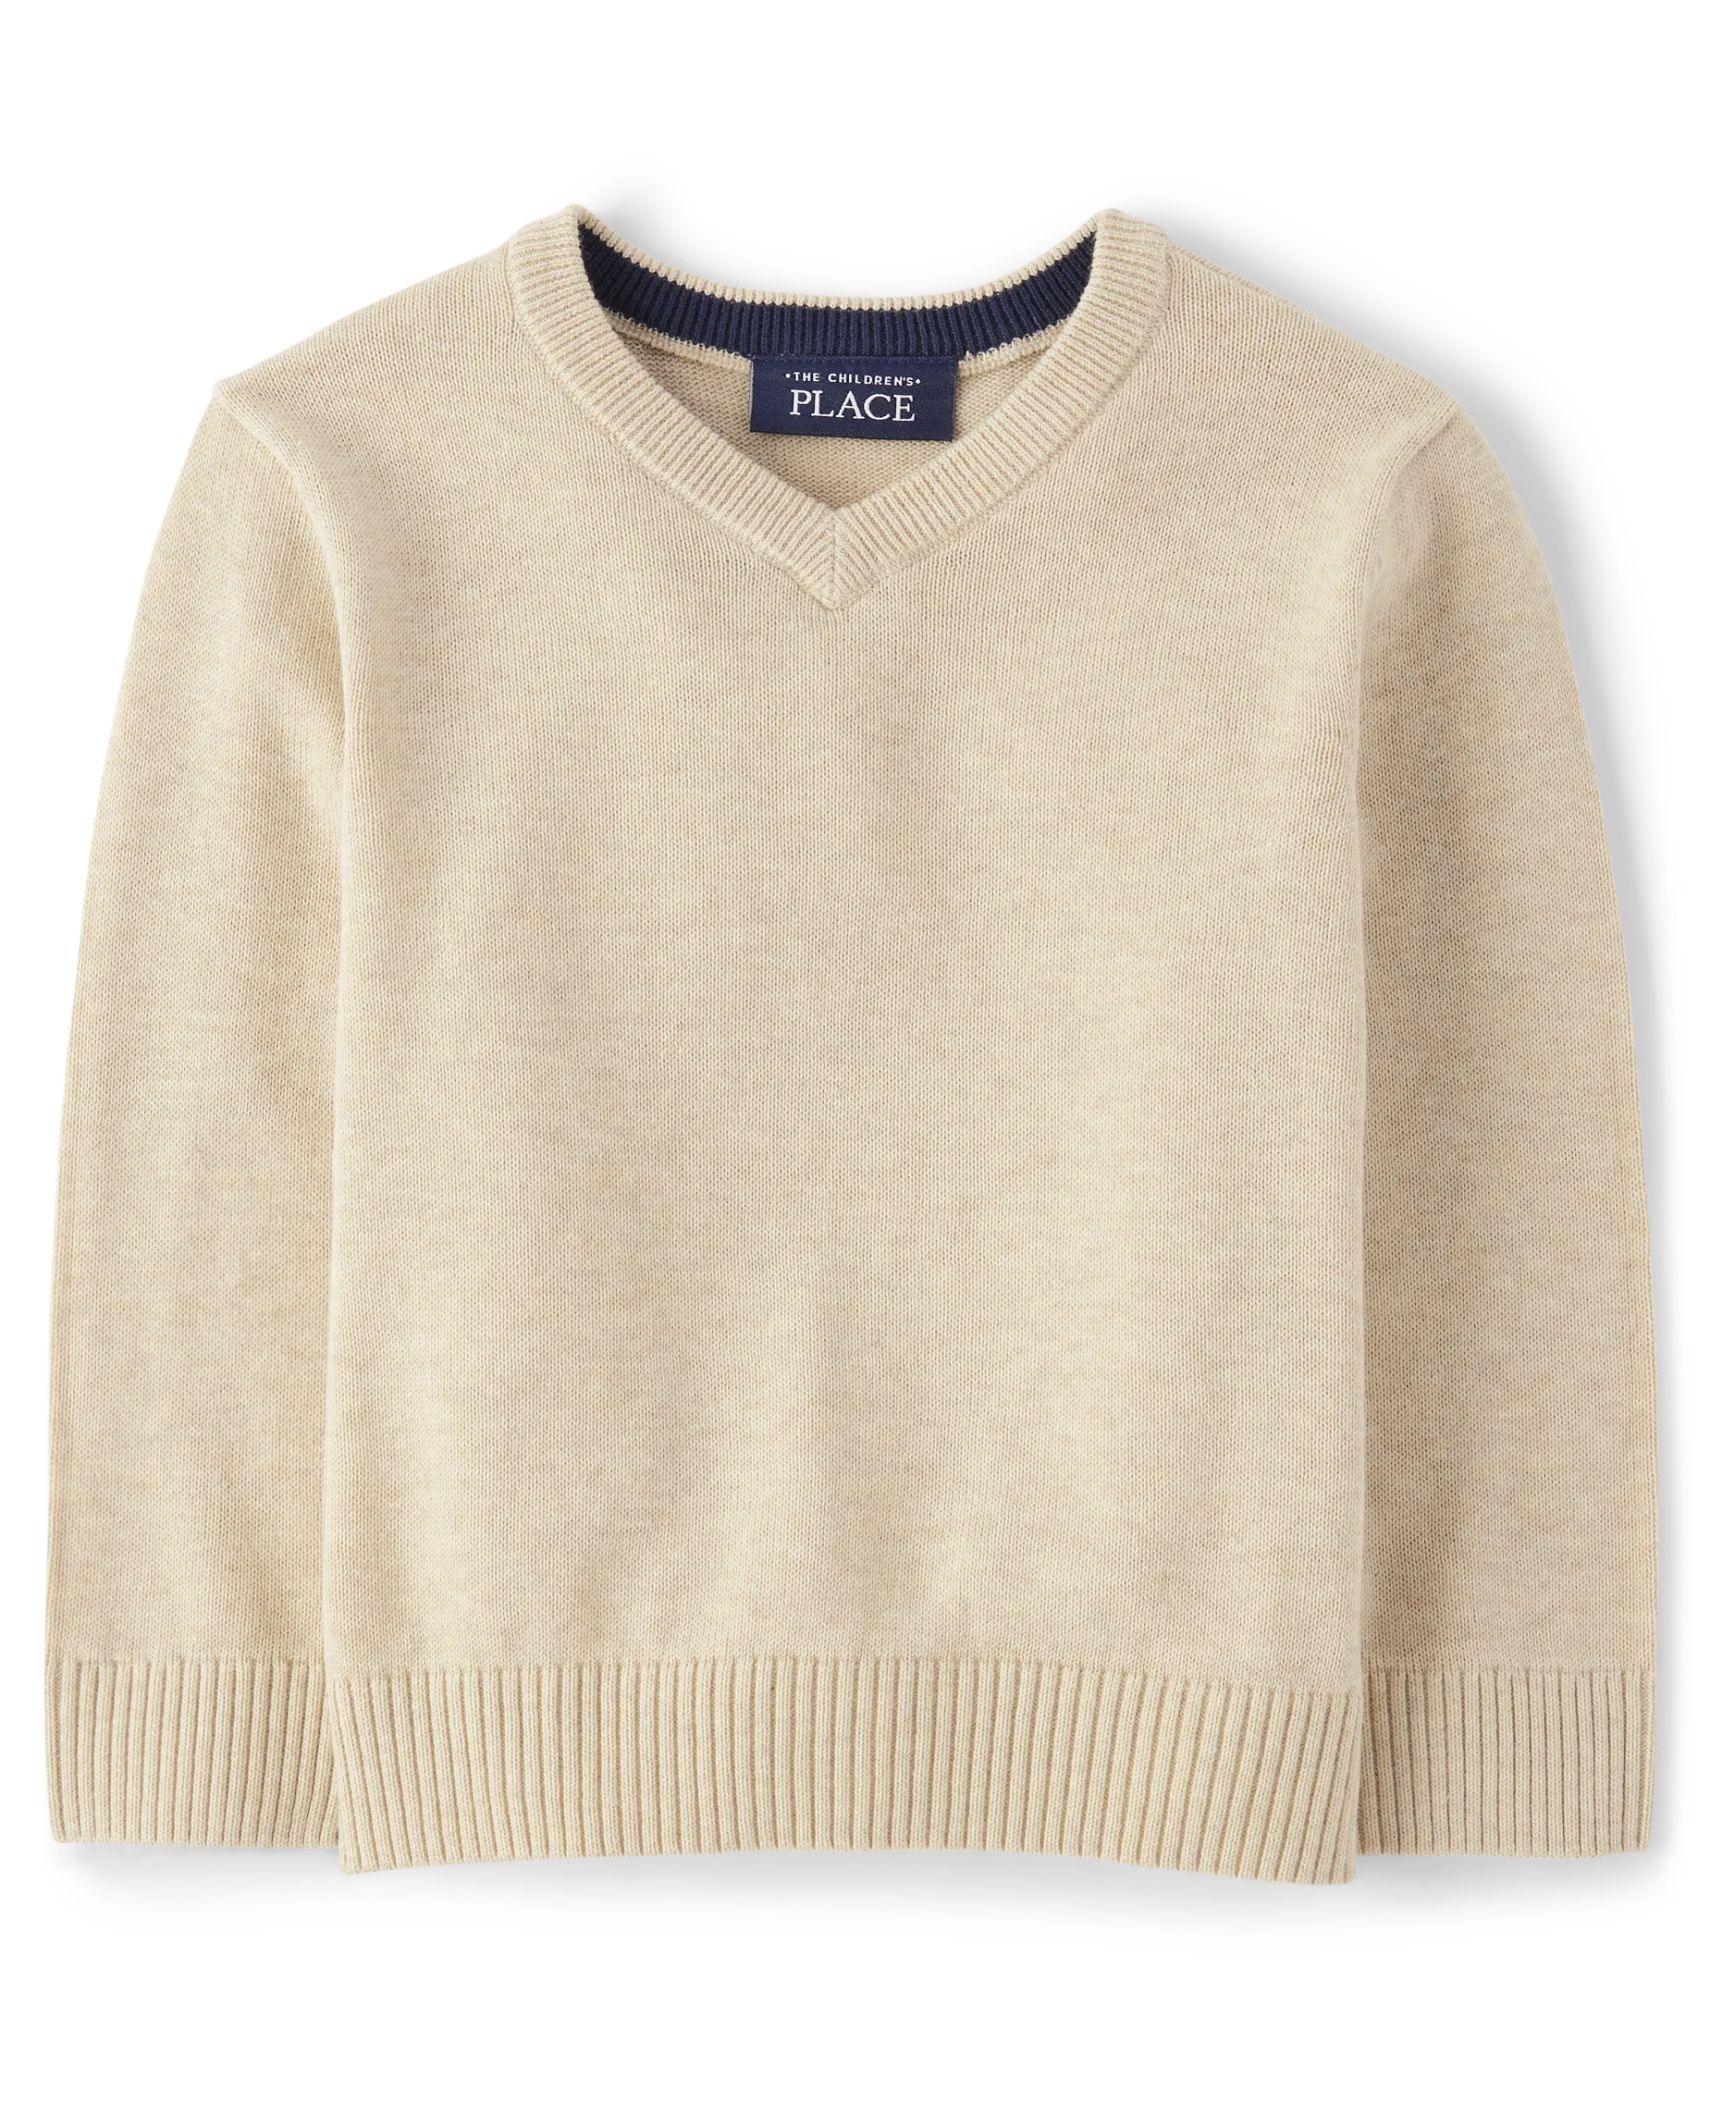 Baby And Toddler Boys V Neck Sweater - h/t straw | The Children's Place